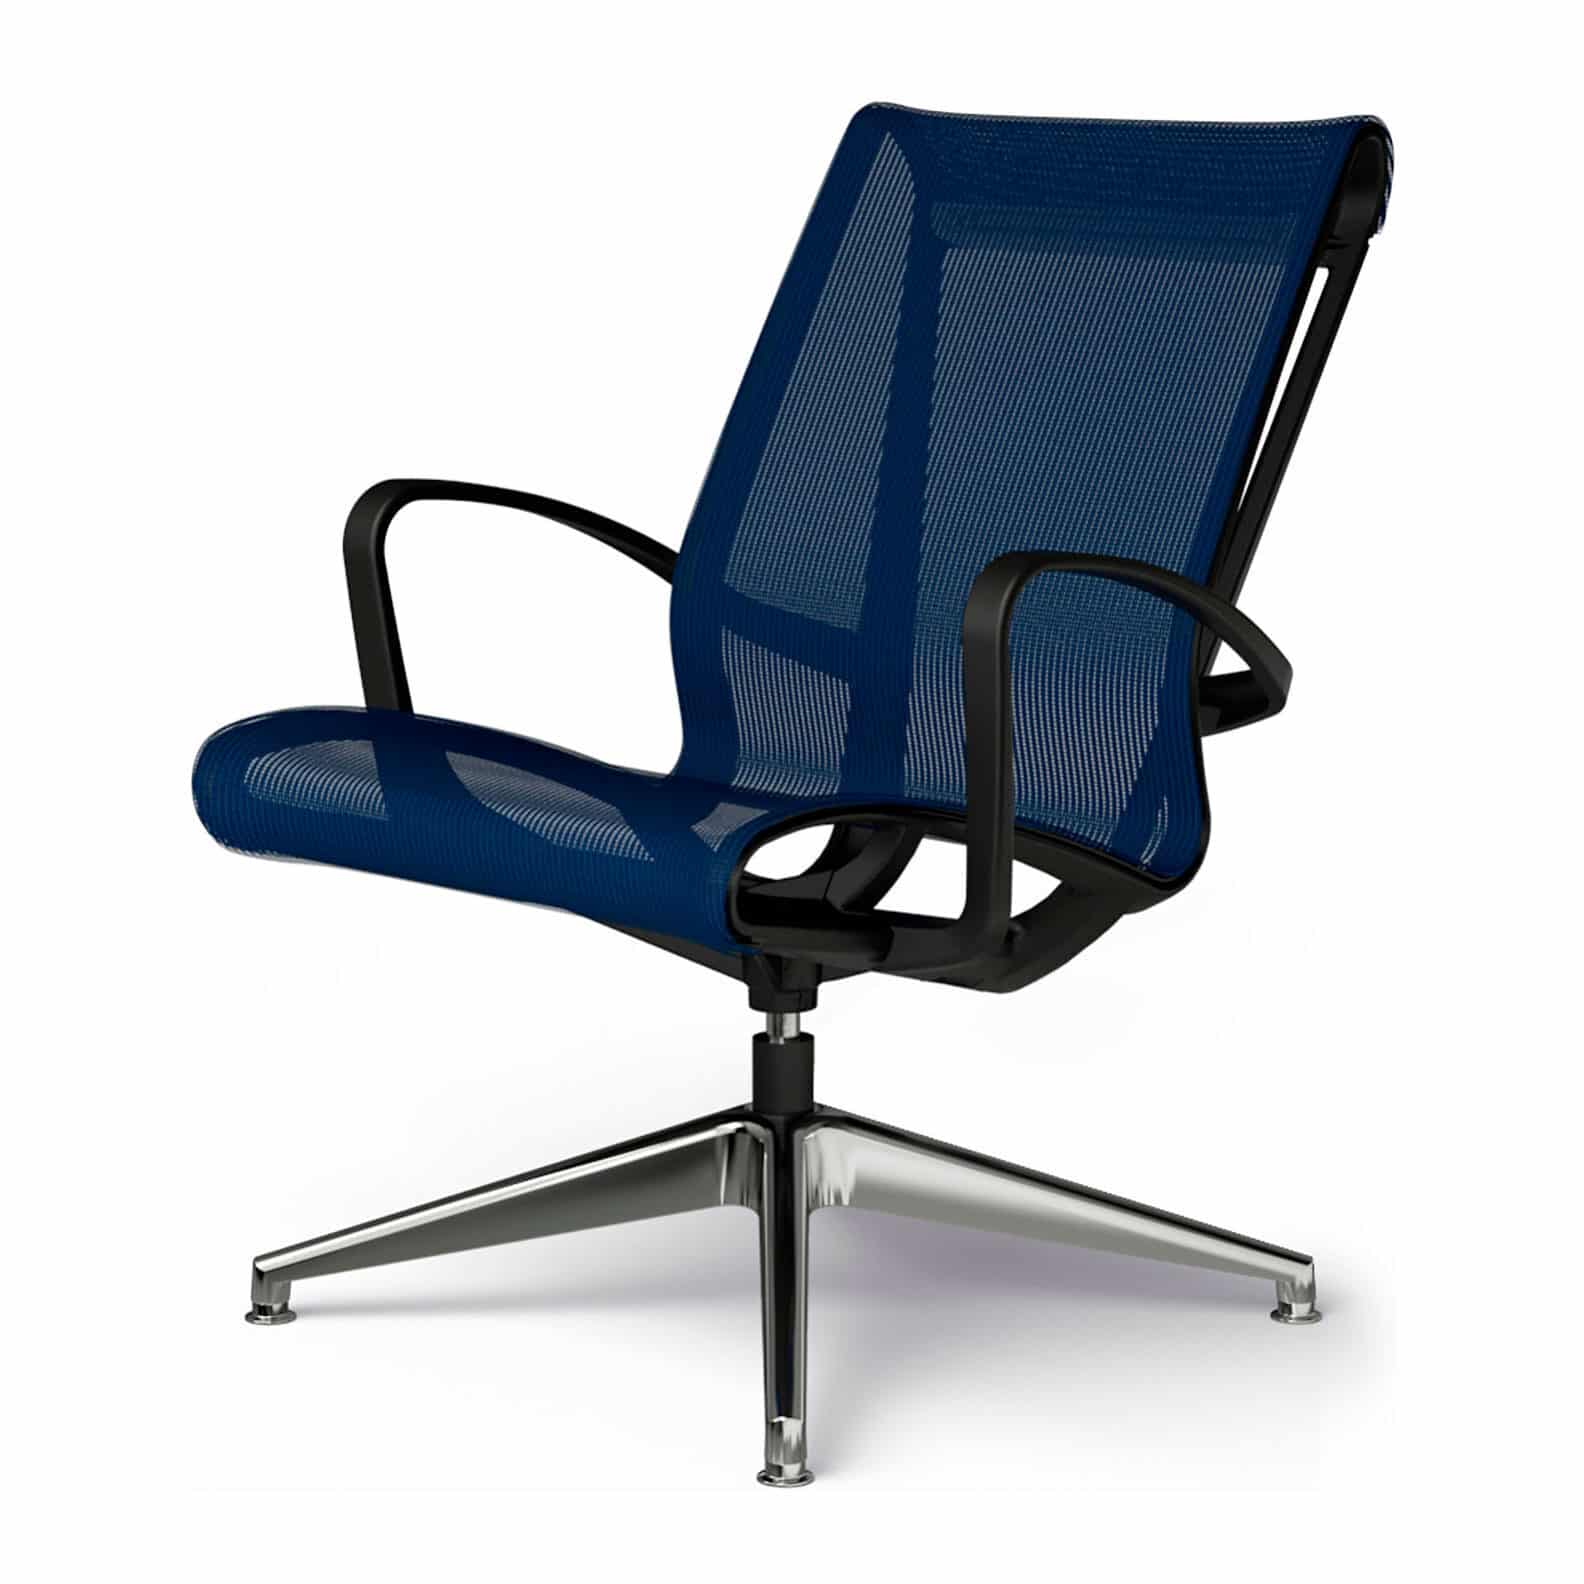 9 to 5 Seating's Cydia series comes in task, stool, conference and executive seating; Mesh or upholstered back options; 3 designer frame colors; and mid-scale and full-scale sizes.